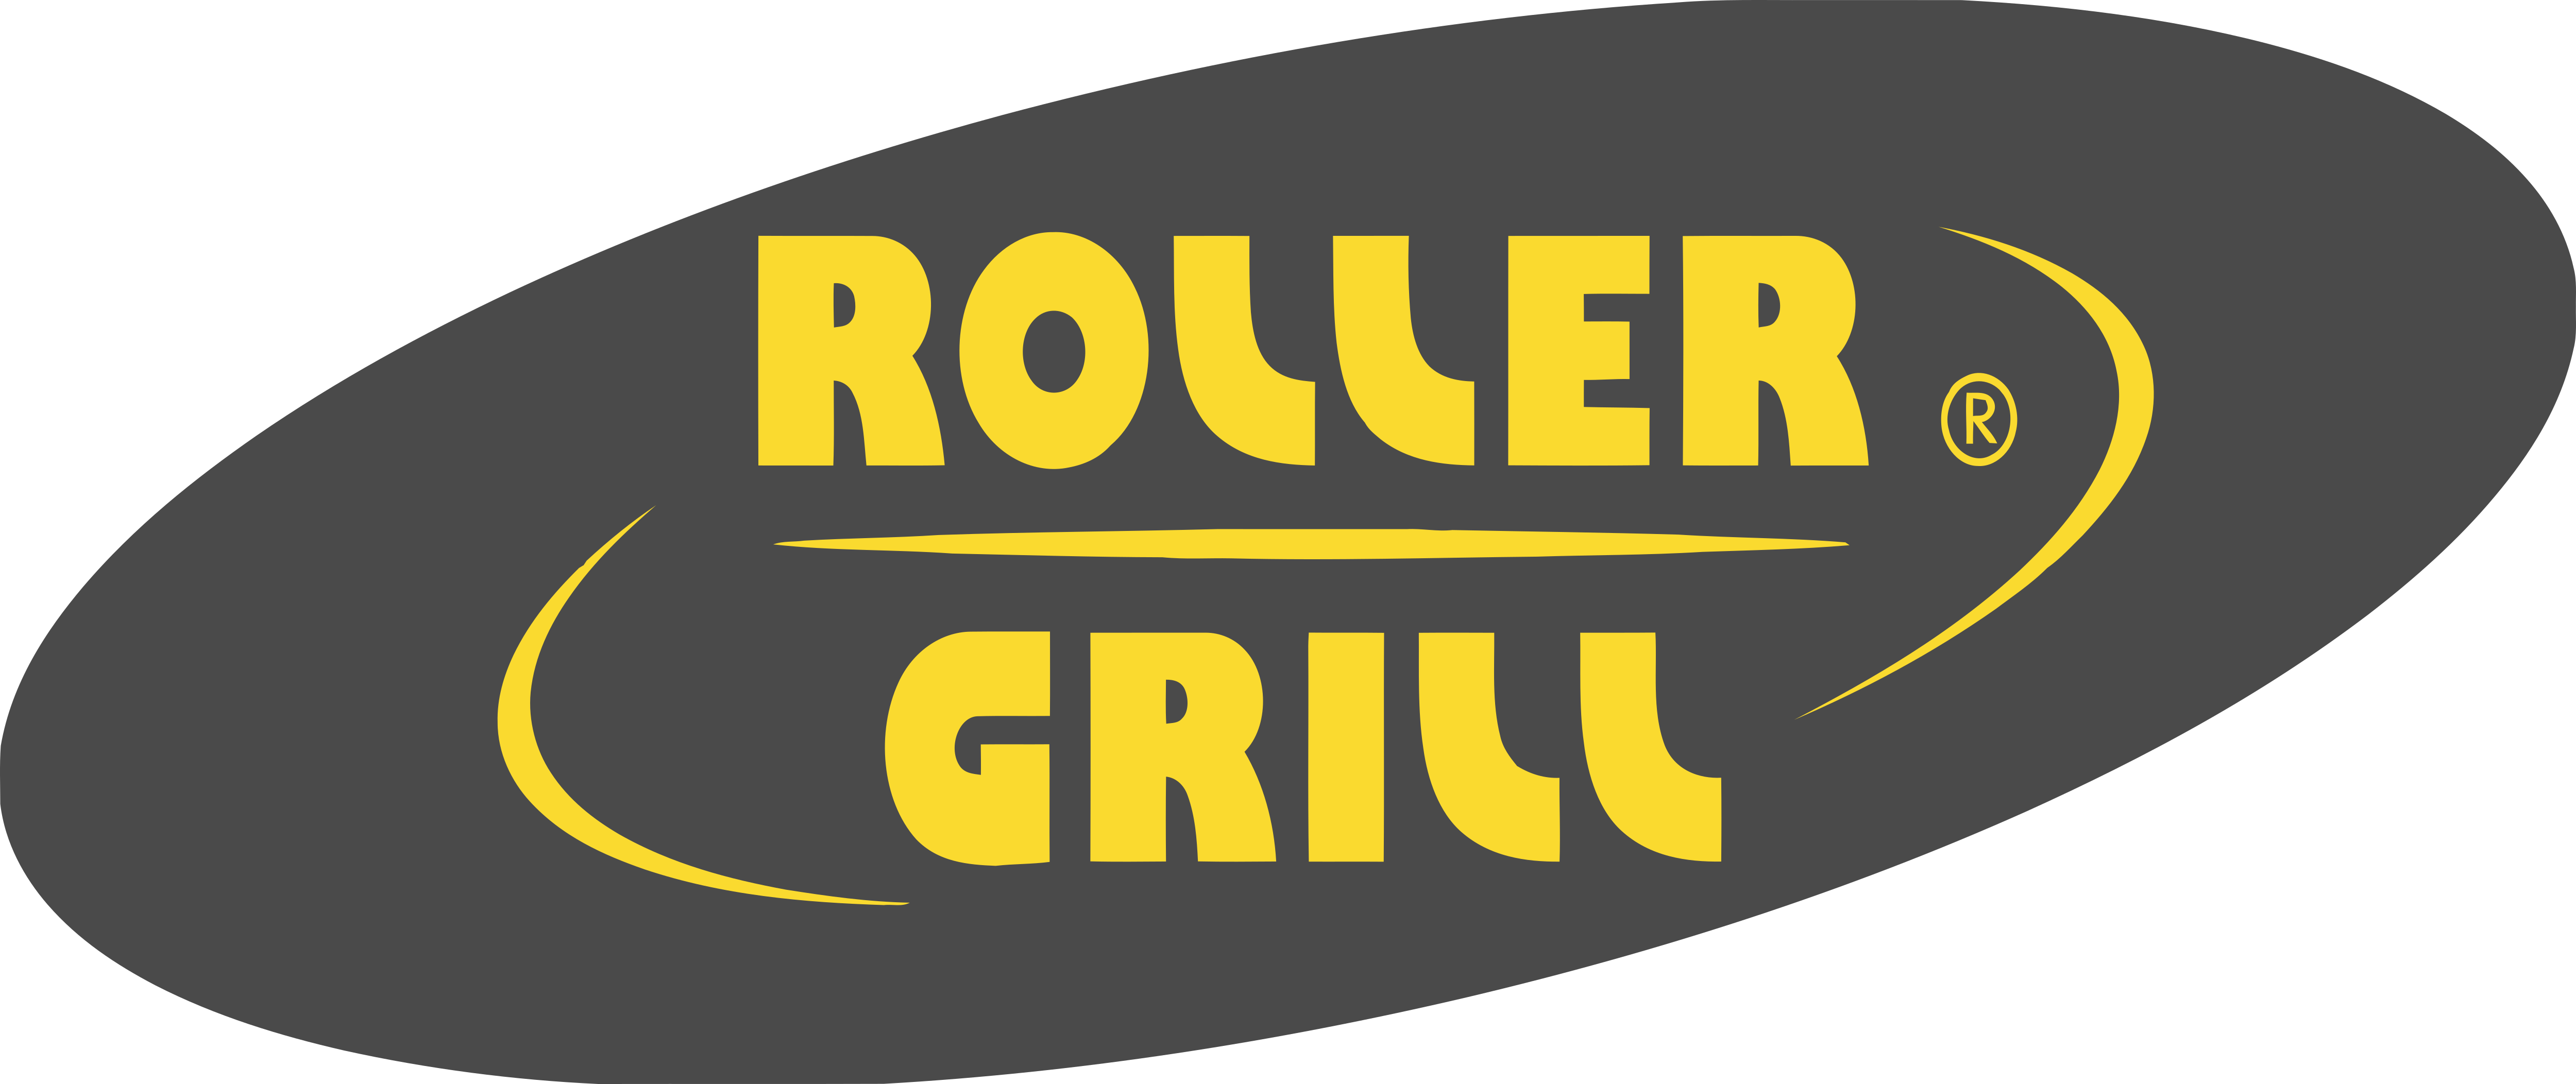 ROLLER GRILLロゴ